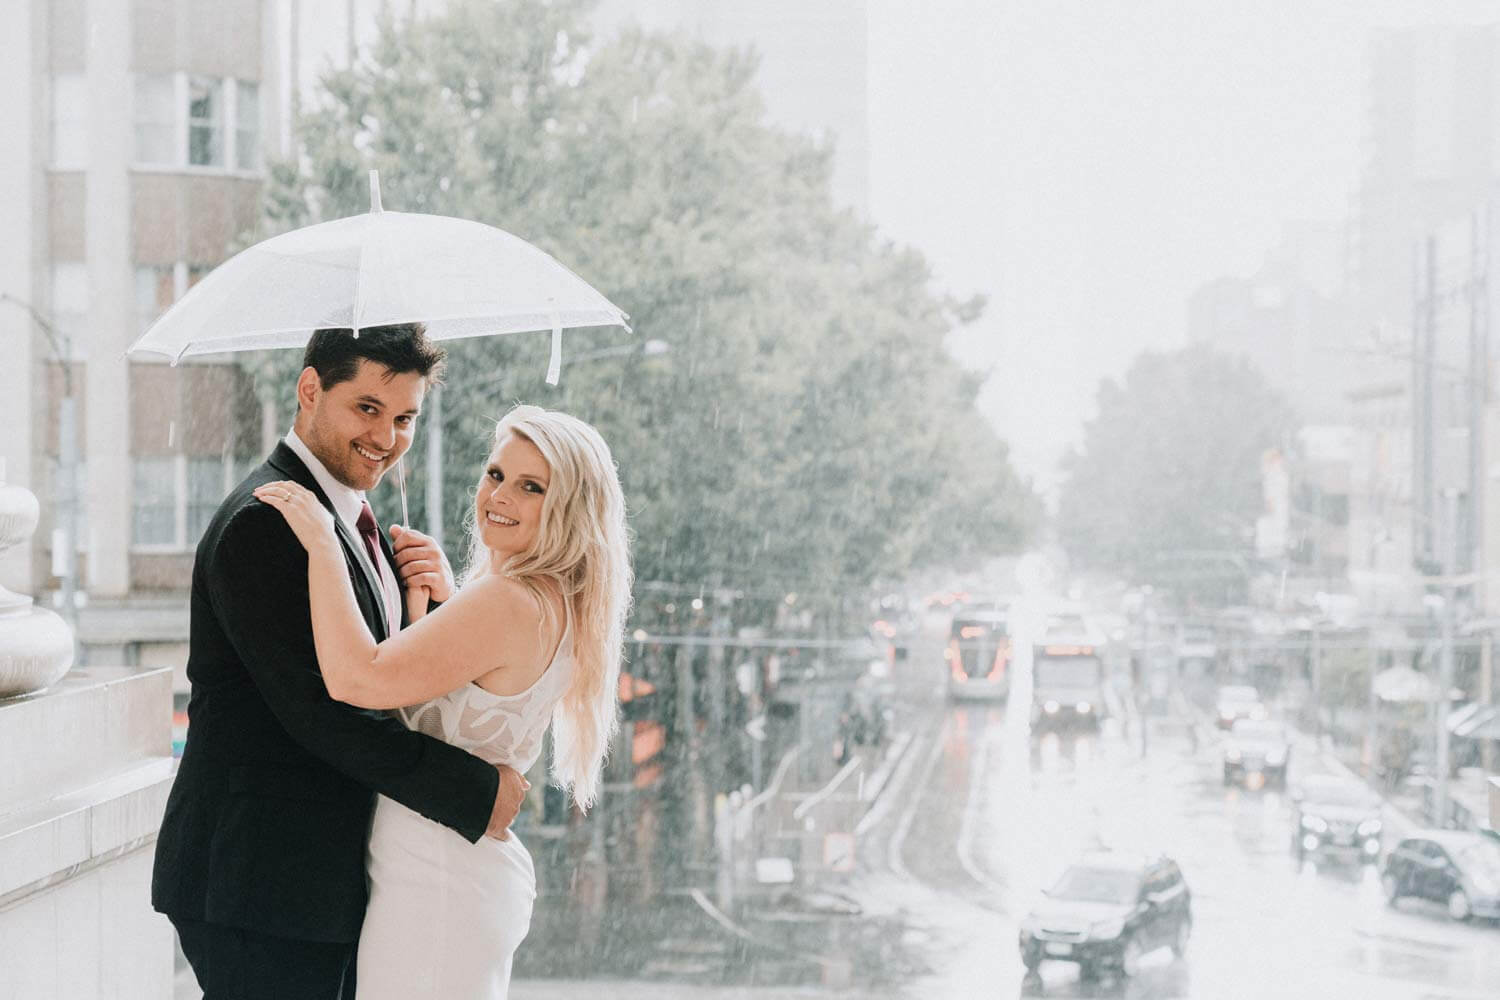 The bride and groom have beautiful smiles on both their faces as they embrace each other, sharing an umbrella under the pouring rain.